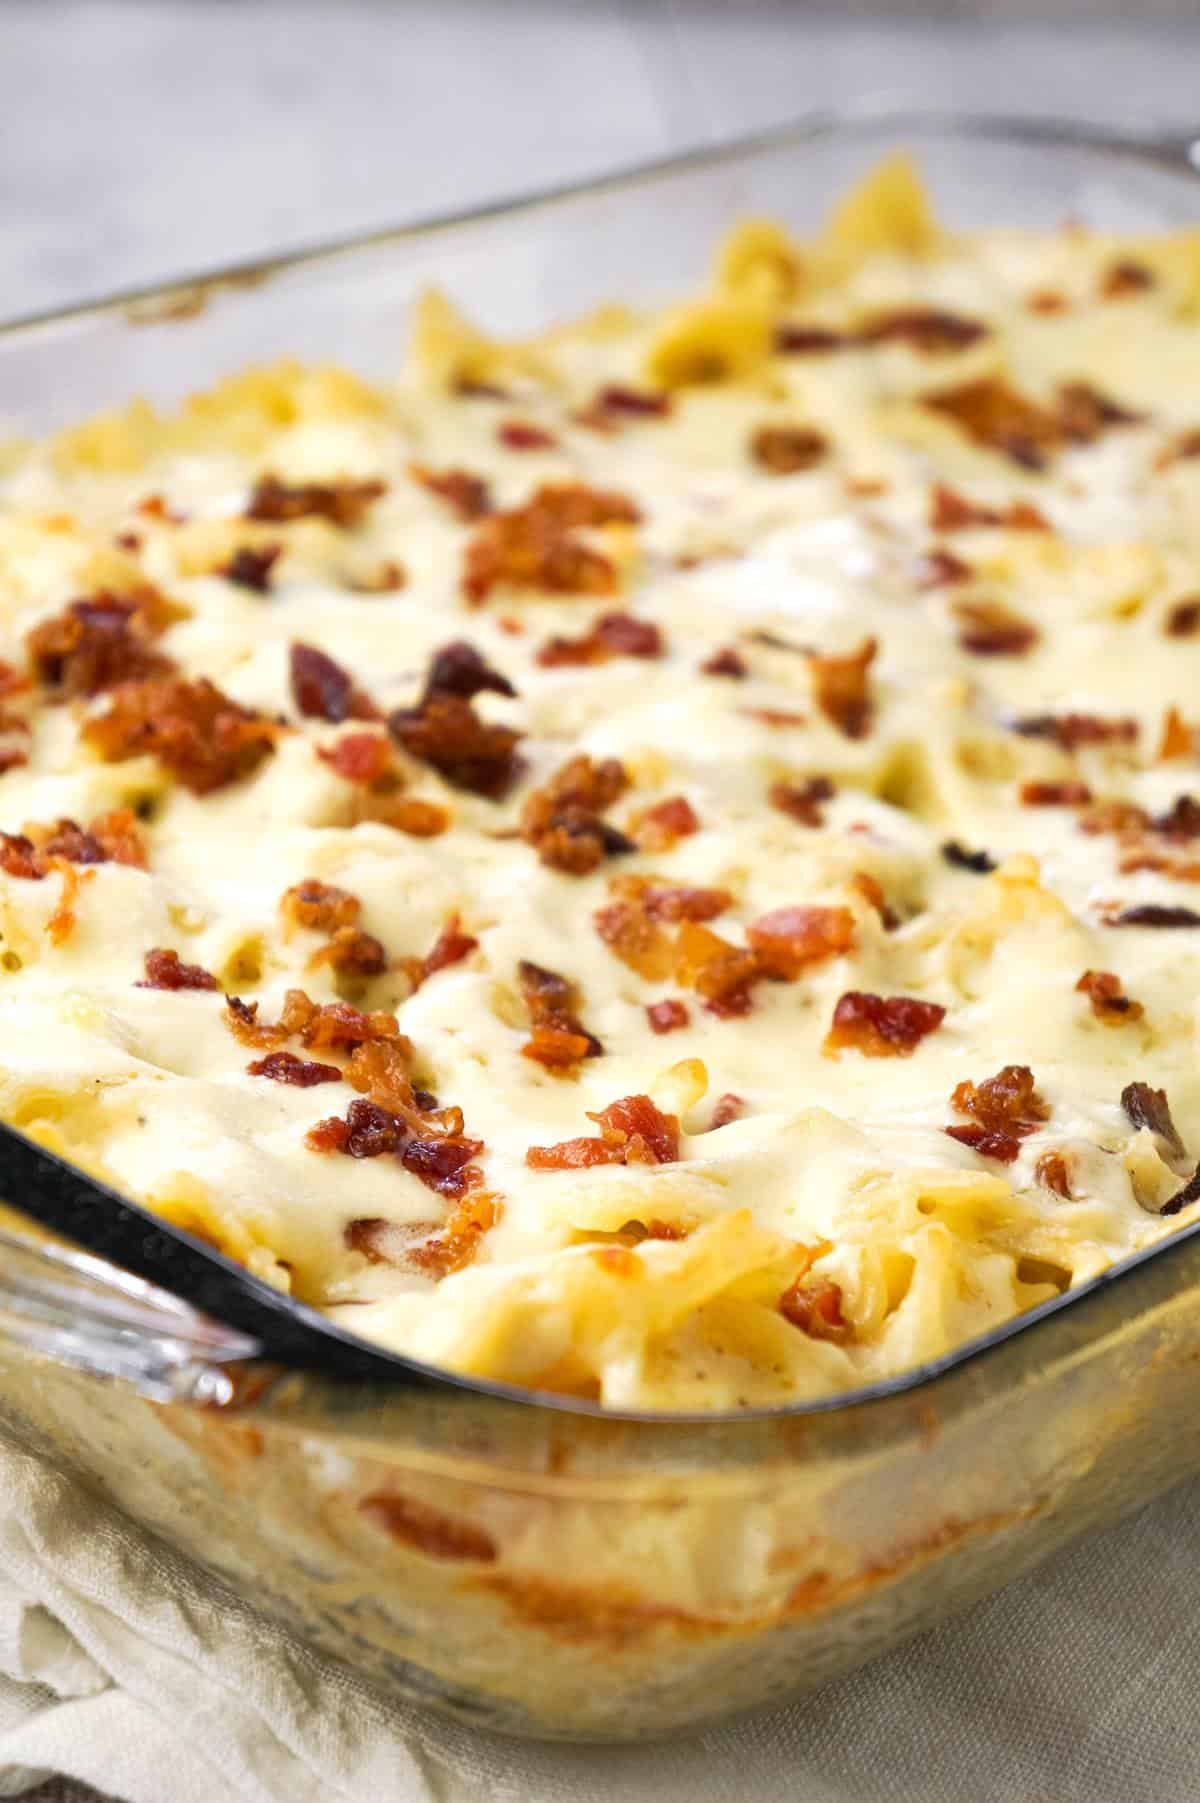 Baked Chicken Alfredo Pasta with Bacon is a delicious dinner recipe loaded with bow tie pasta, shredded chicken and crumbled bacon all in a creamy garlic Parmesan sauce and baked with mozzarella on top.